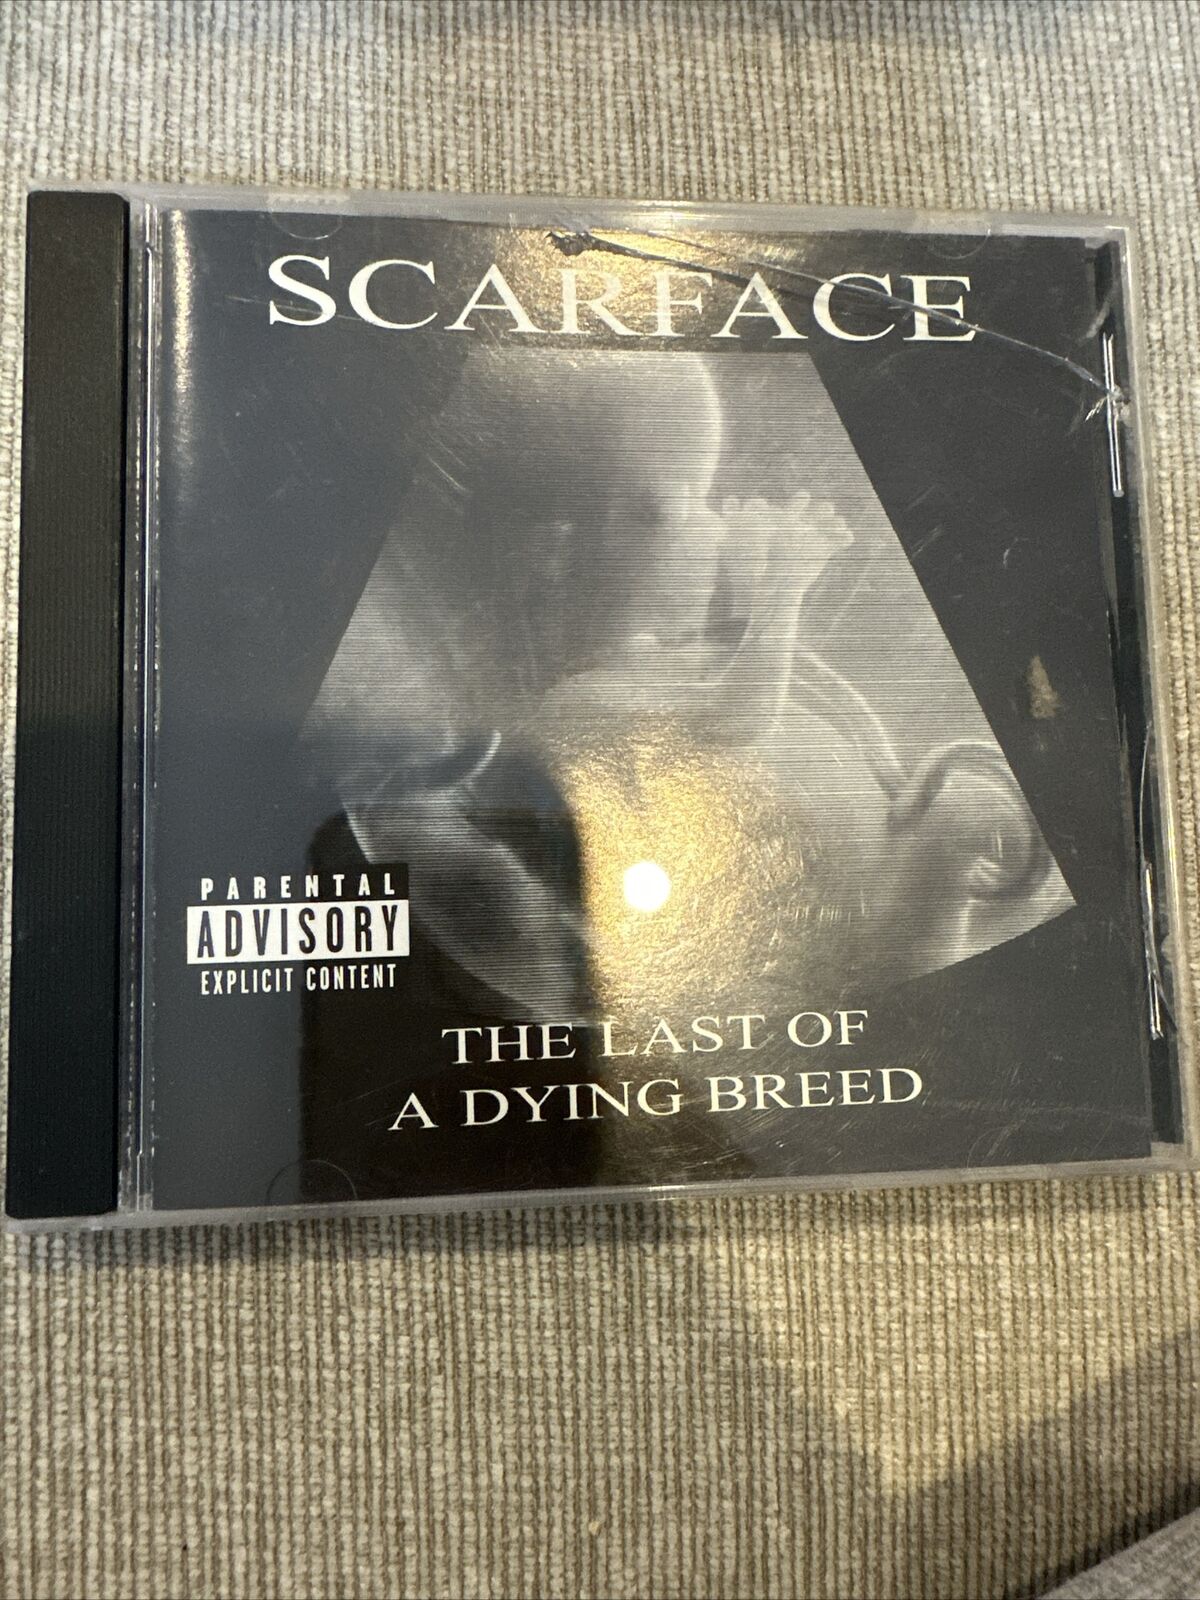 Scarface – The Last Of A Dying Breed (CD, Sealed, US, 2000, Rap-A-Lot 2K)